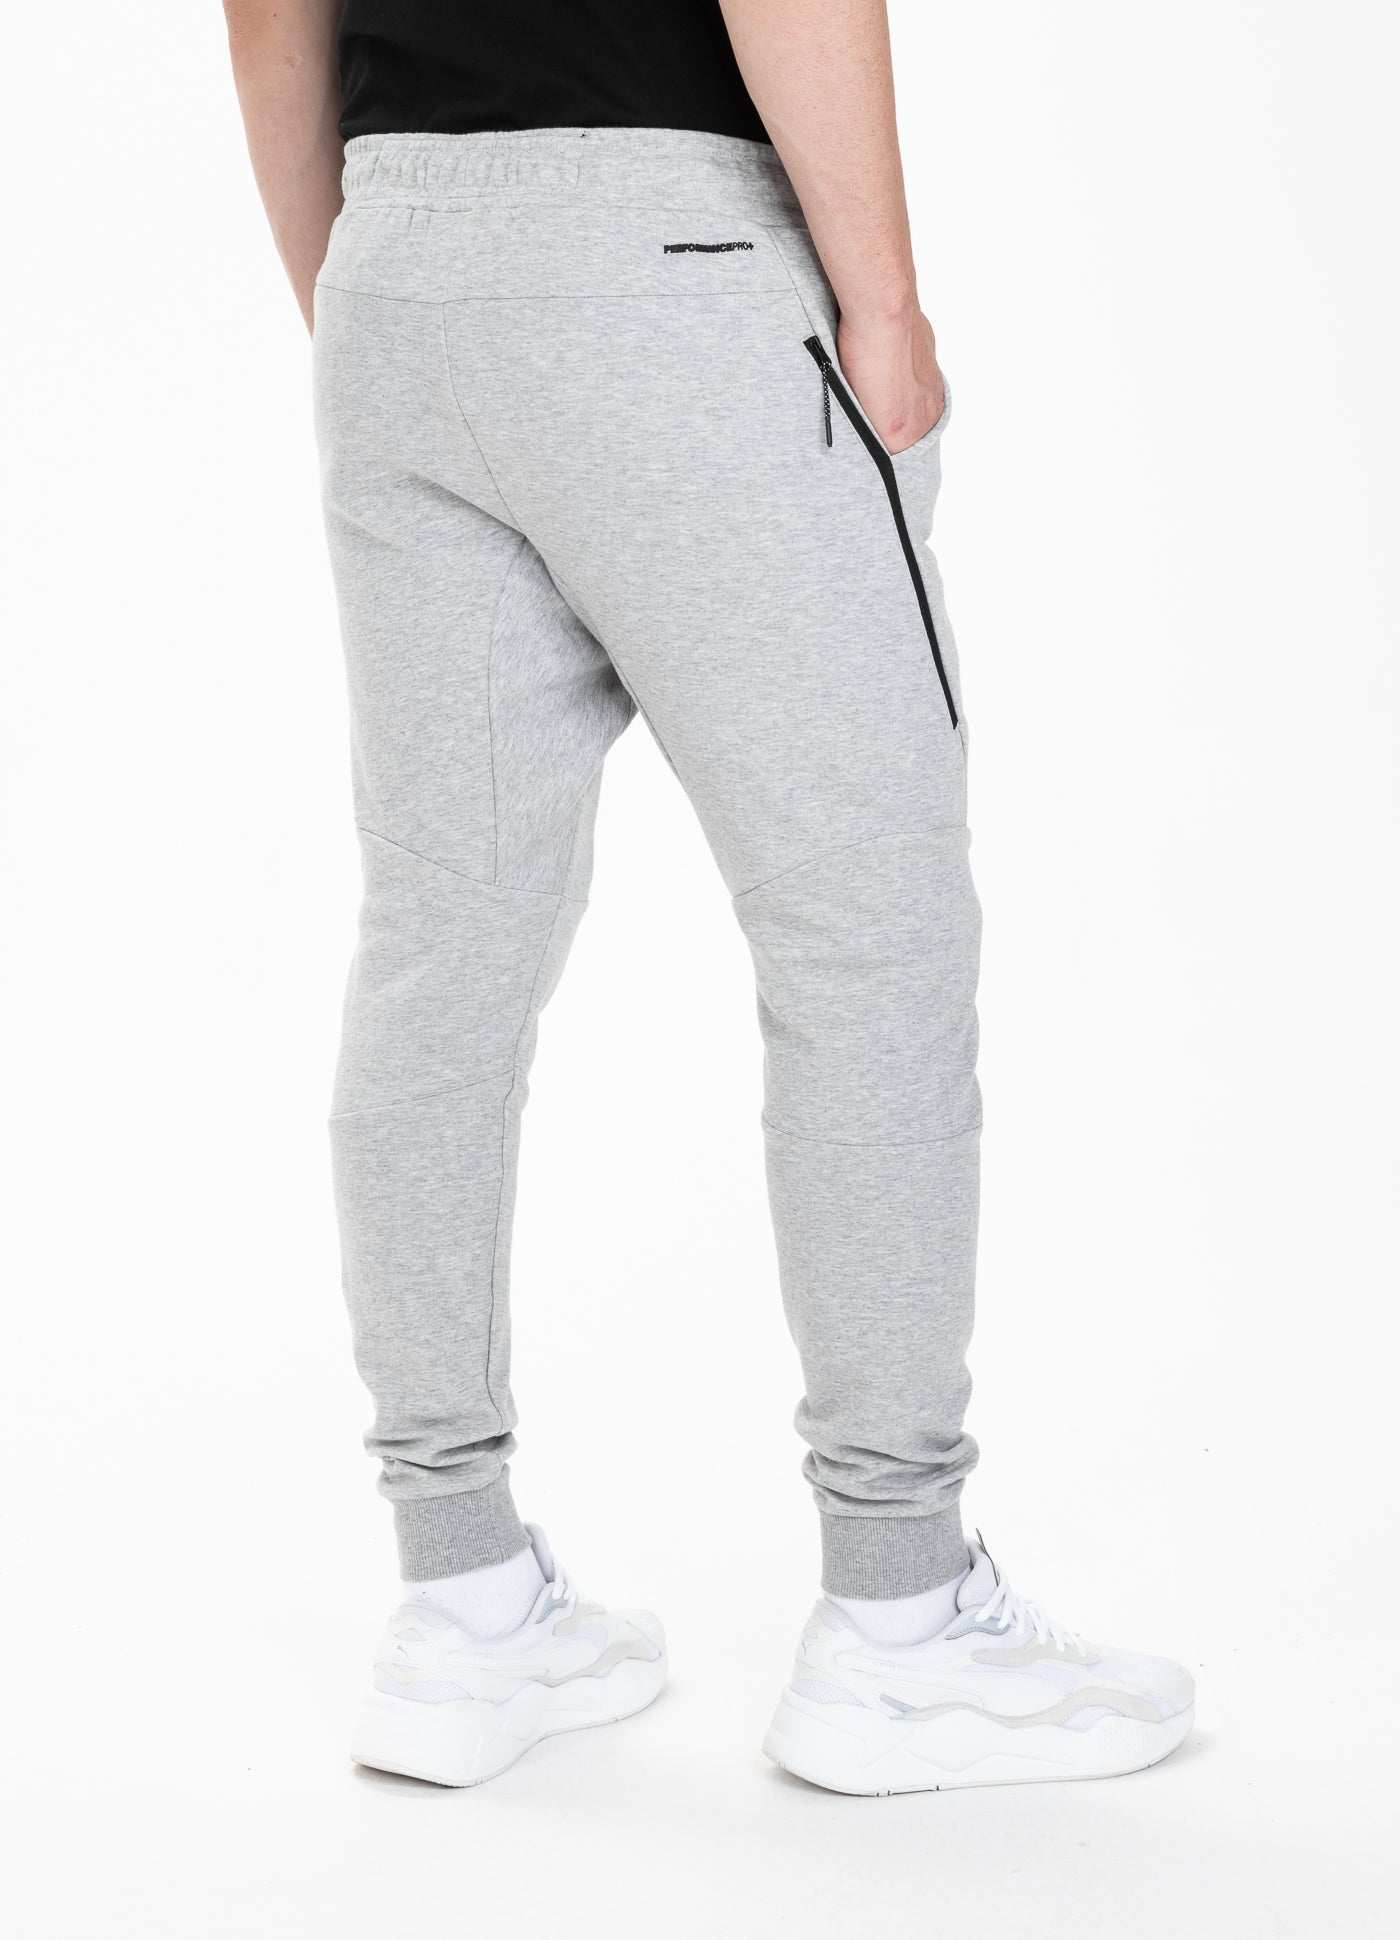 ADCC GREY JOGGERS